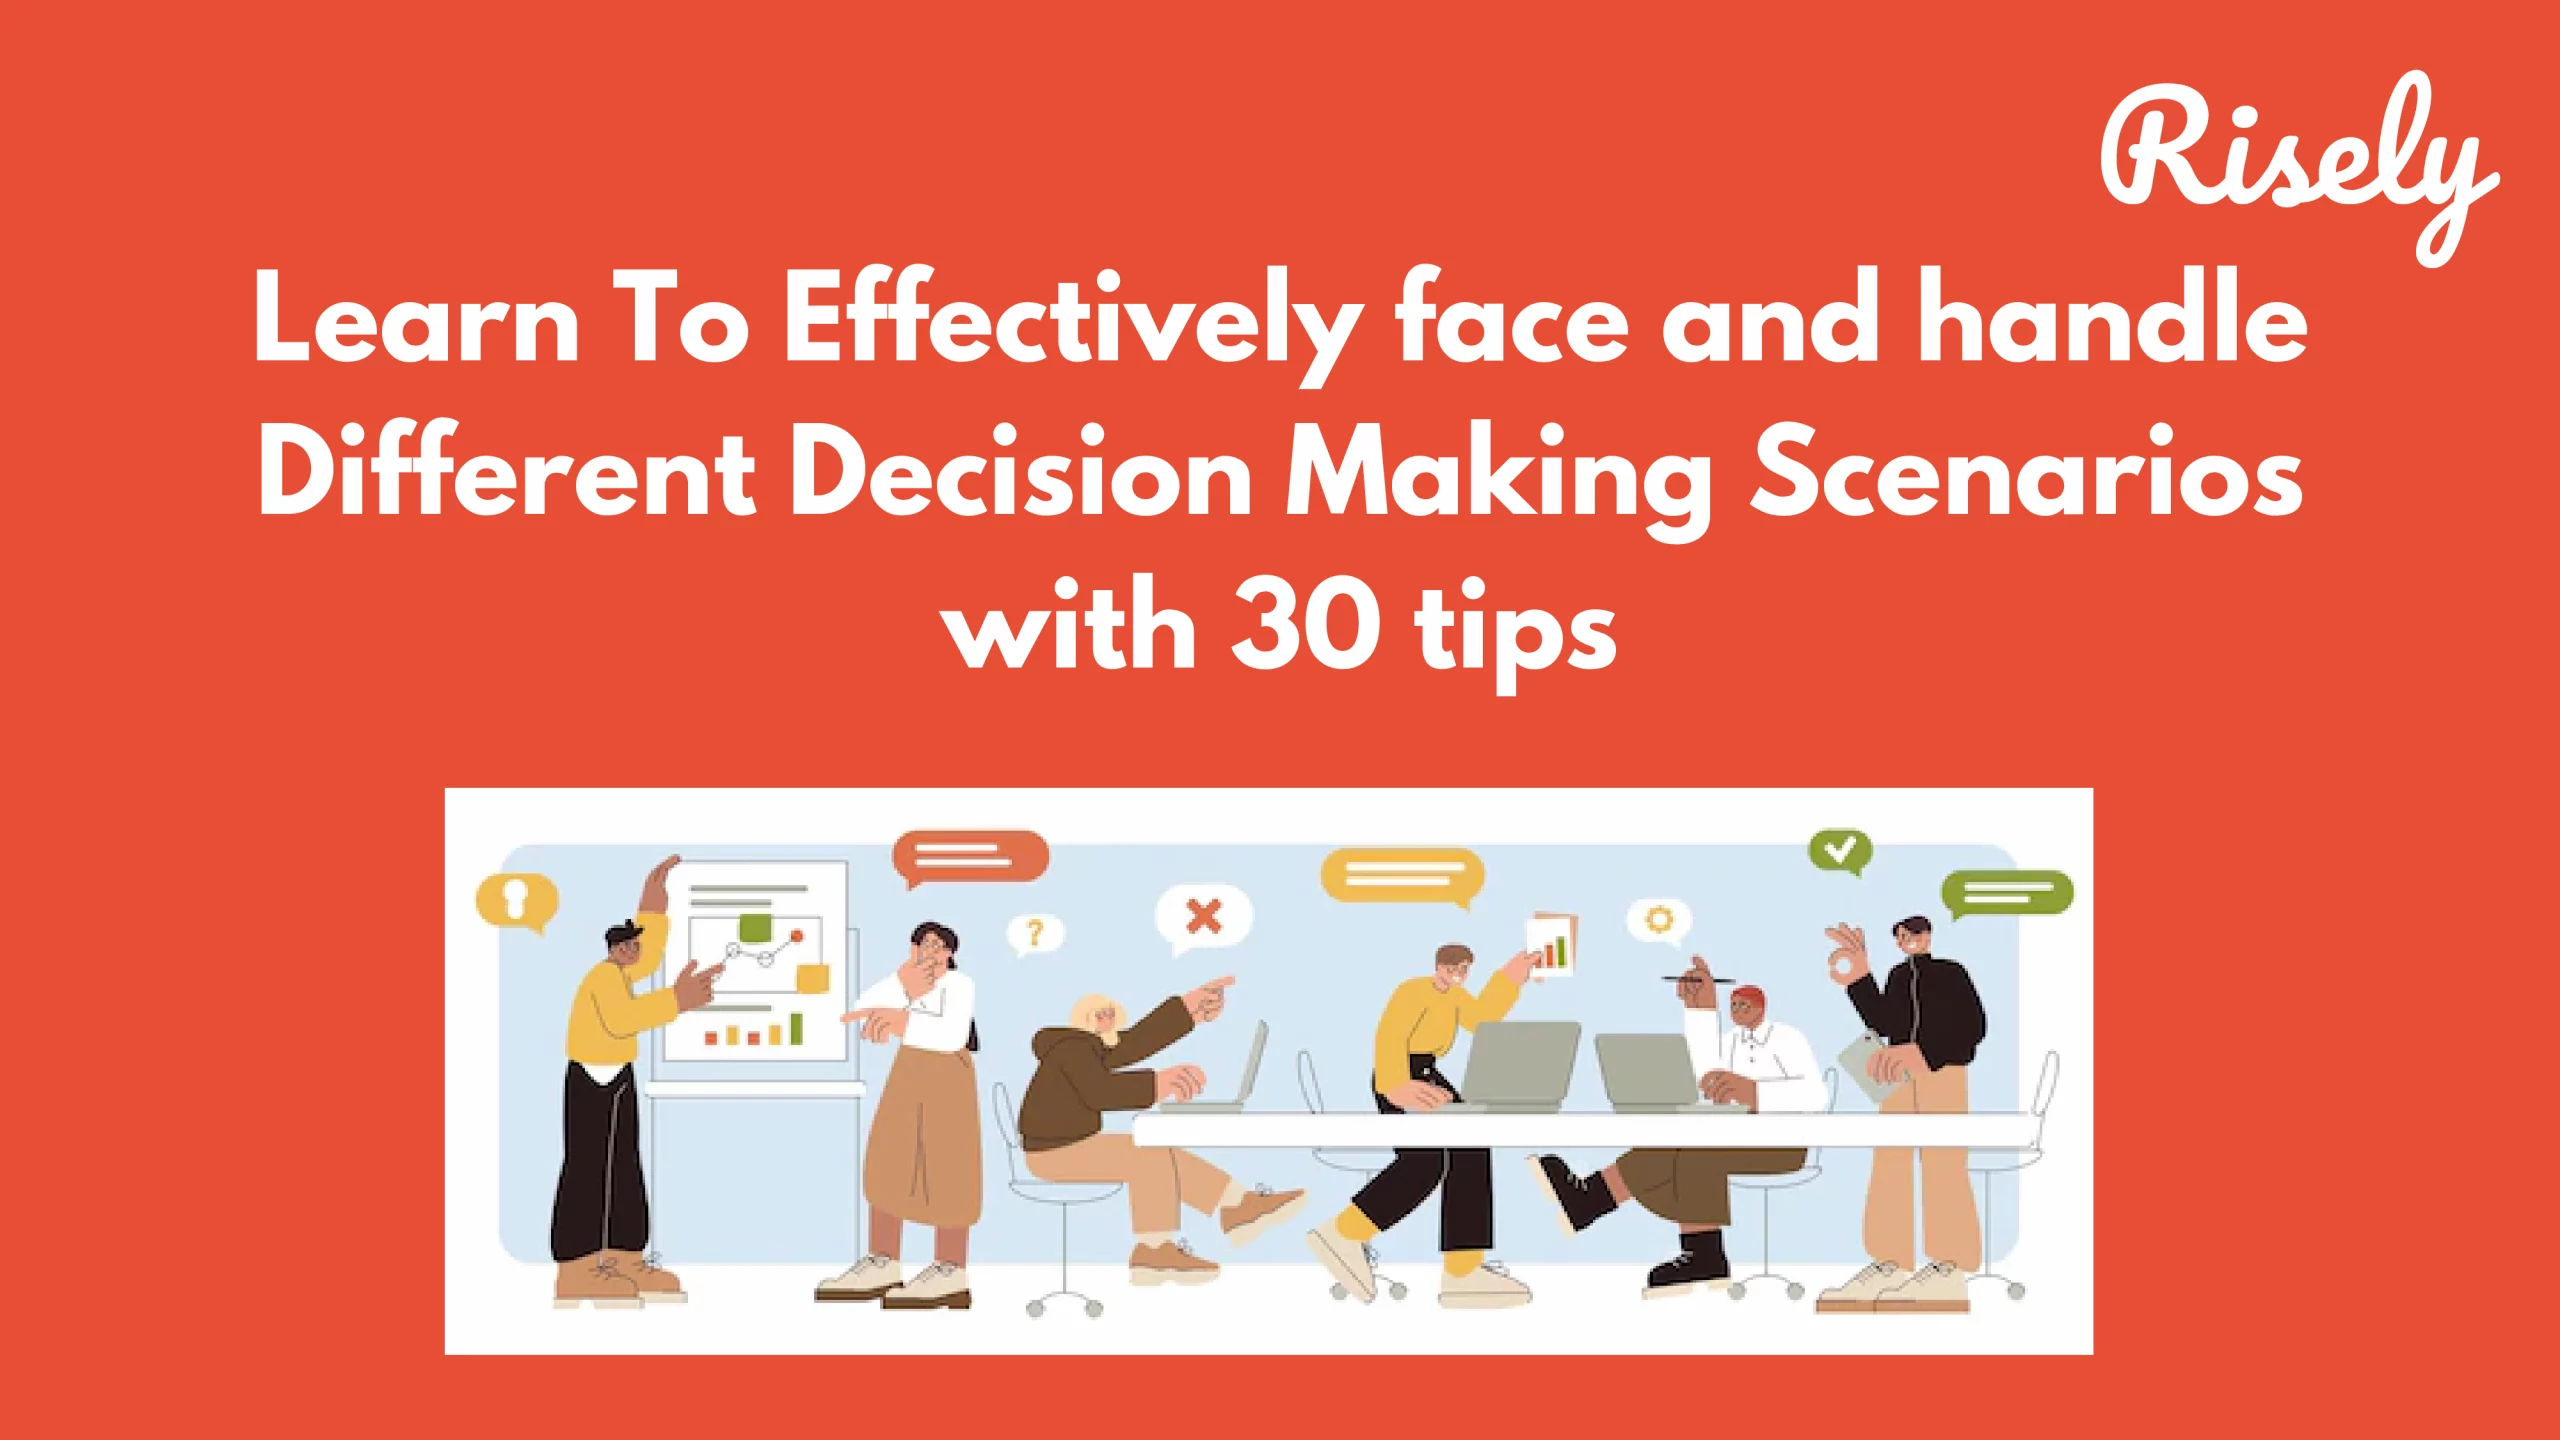 Learn To Effectively face and handle Different Decision Making Scenarios with 30 tips 